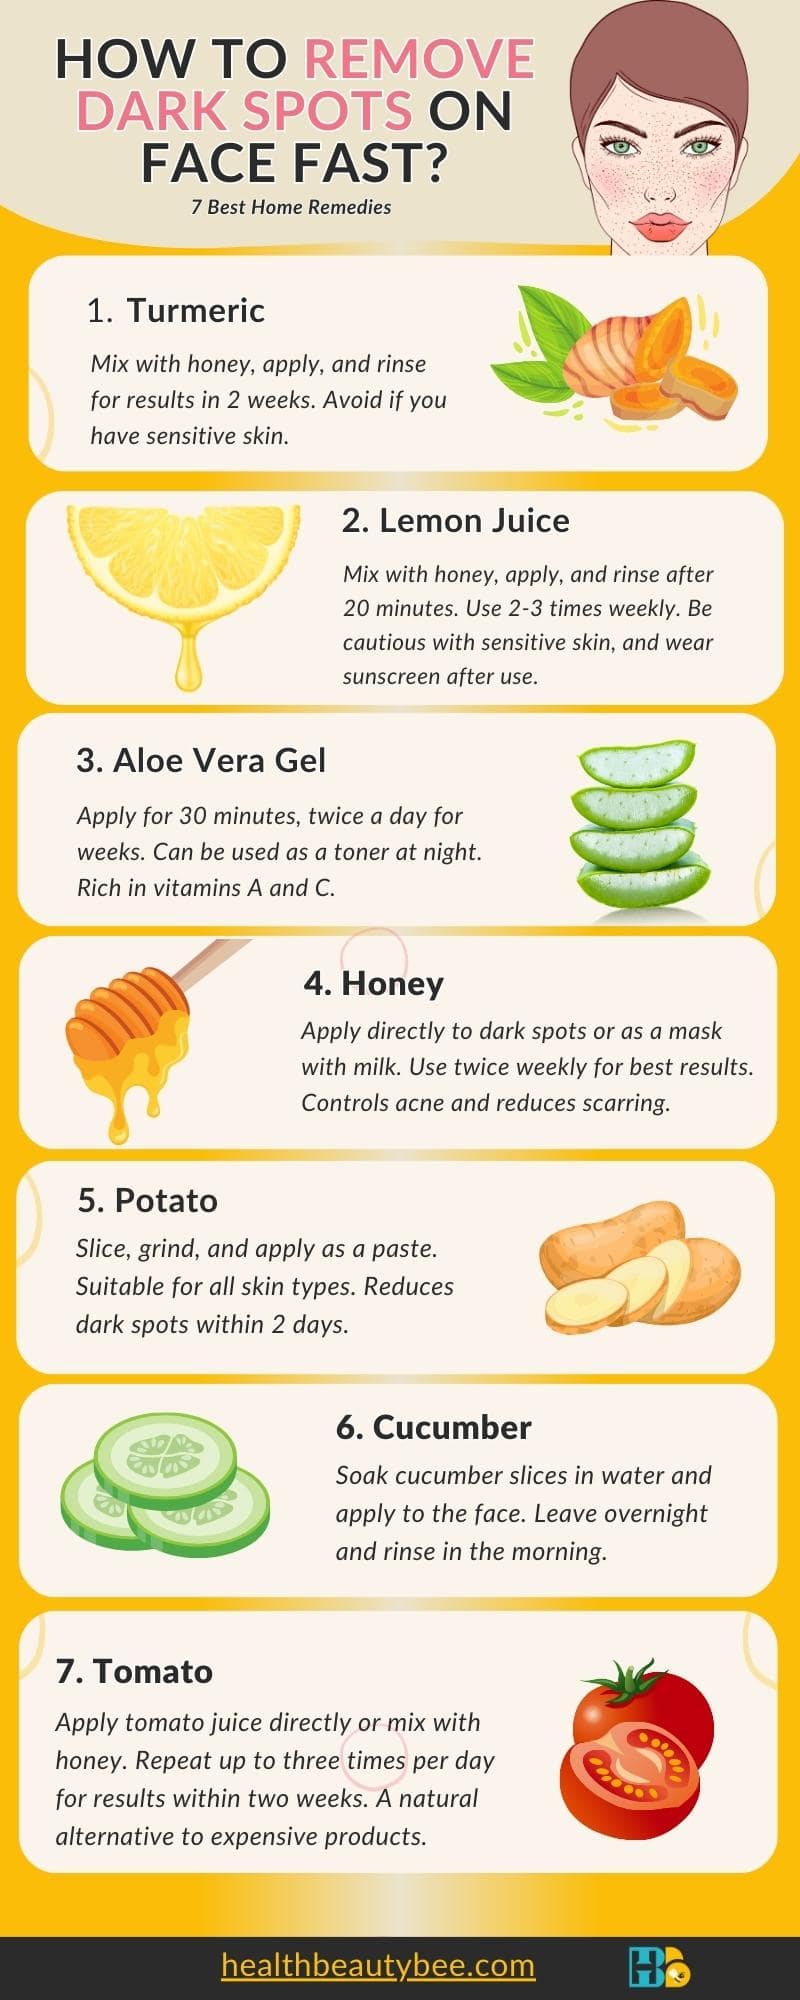 How to Remove Dark Spots on Face Fast Healthbeautybee infographic